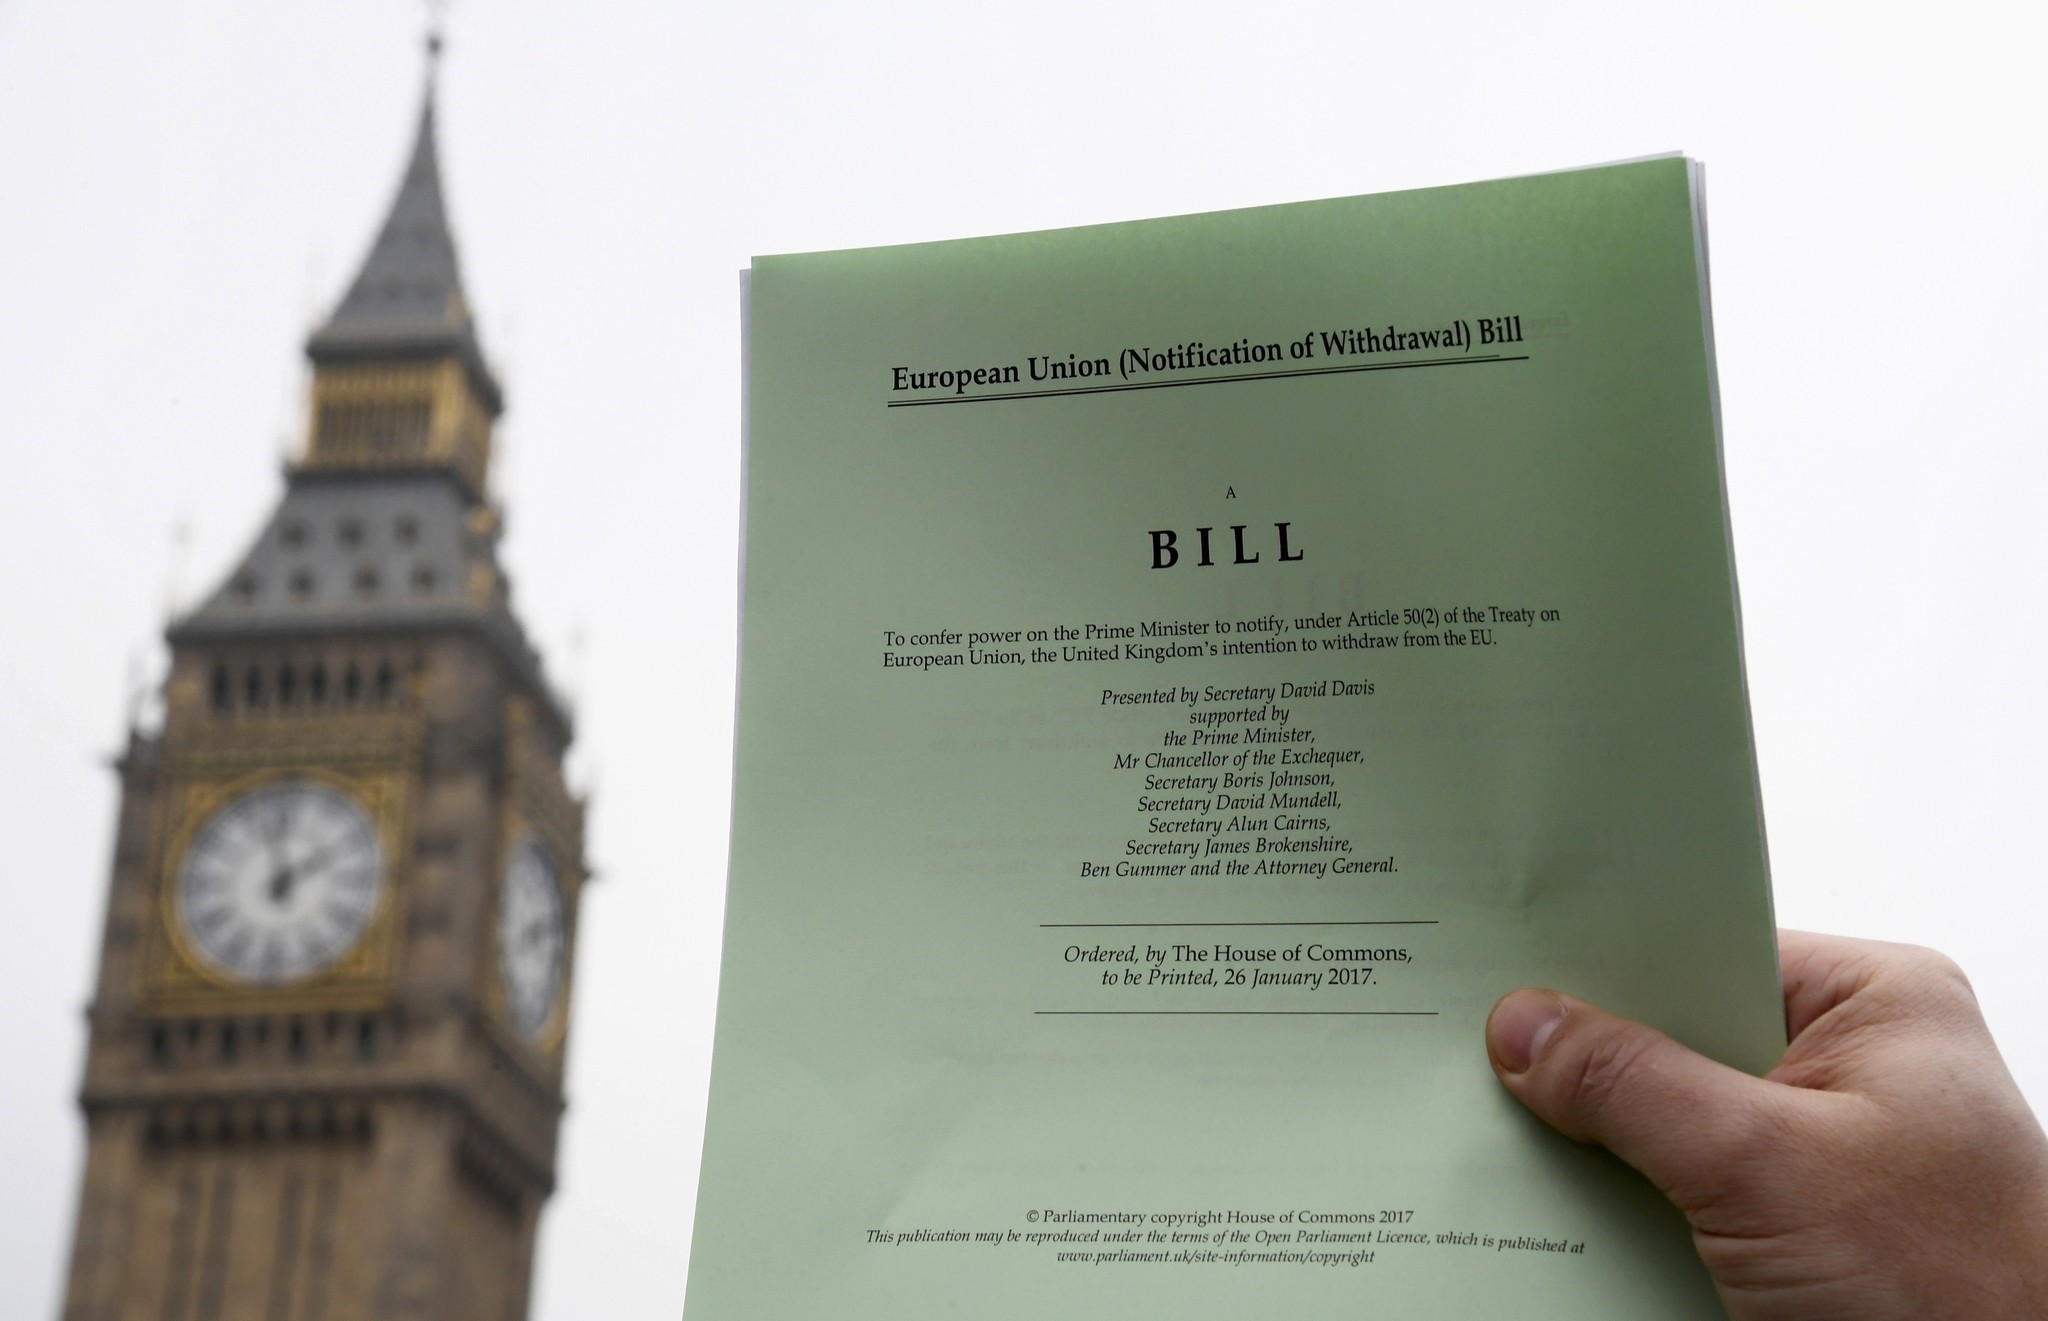 A journalist poses with a copy of the Brexit Article 50 bill, introduced by the government to seek parliamentary approval to start the process of leaving the European Union, in front of the Houses of Parliament in London, Britain, January 26, 2017.